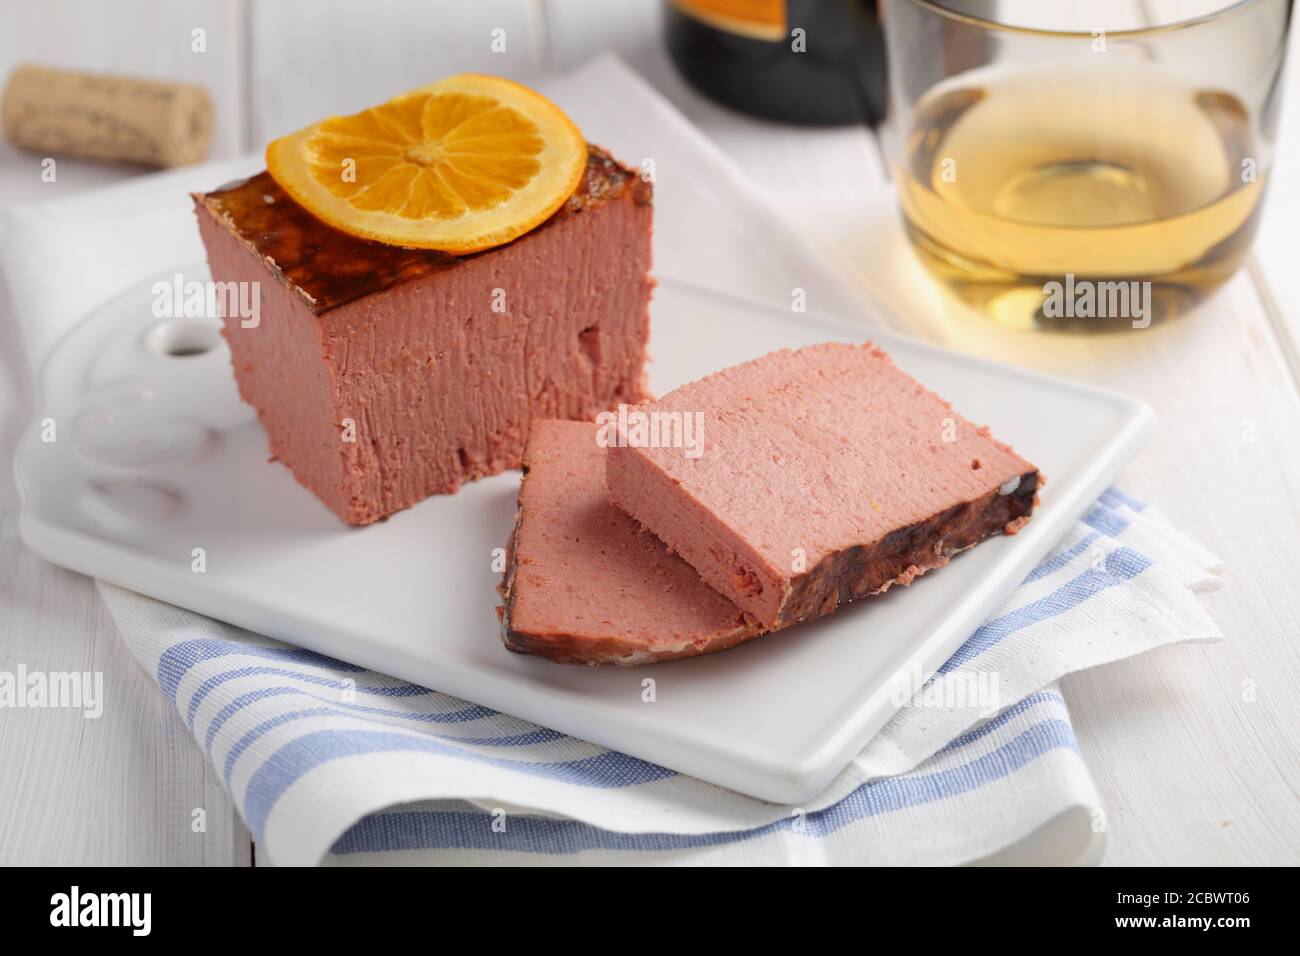 Sliced duck pate topped with slice of orange and a cup of white wine closeup Stock Photo